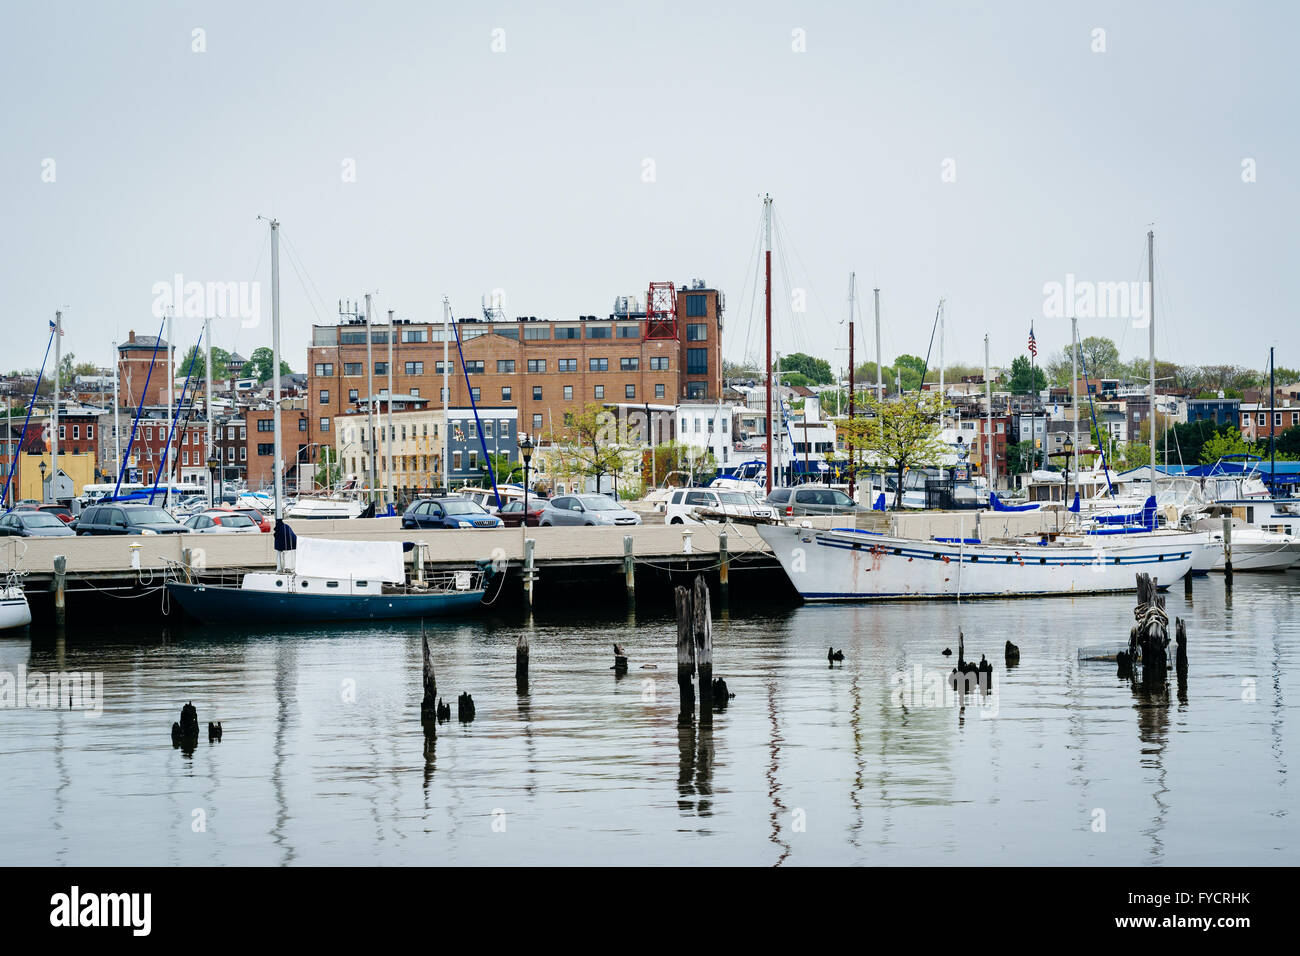 Boats and buildings on the waterfront in Fells Point, Baltimore, Maryland. Stock Photo